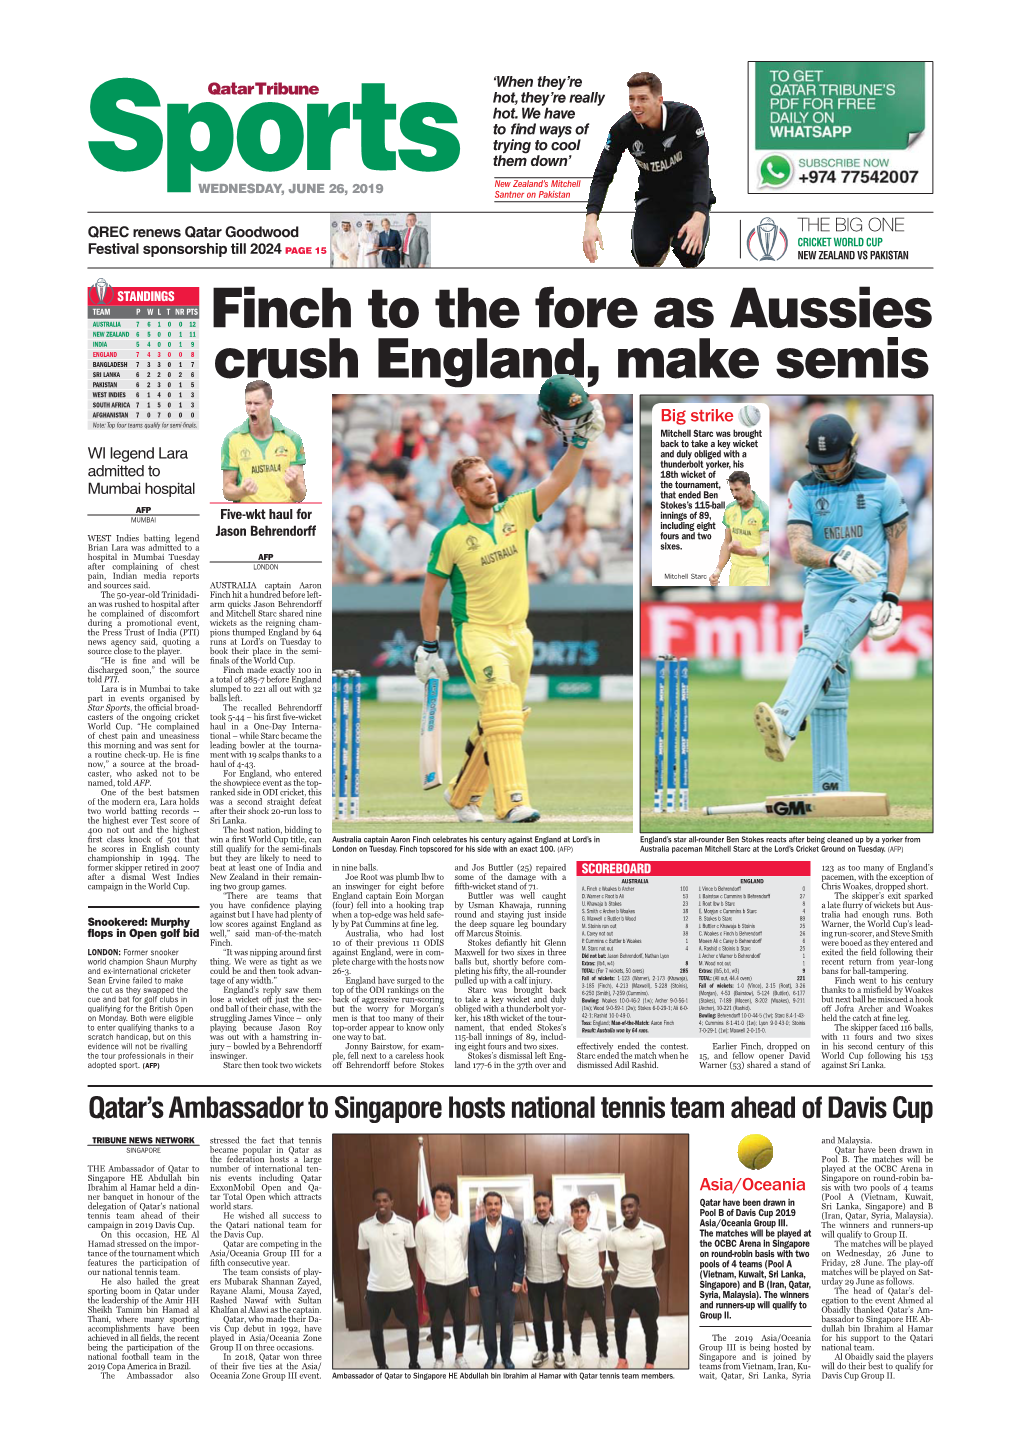 Finch to the Fore As Aussies Crush England, Make Semis